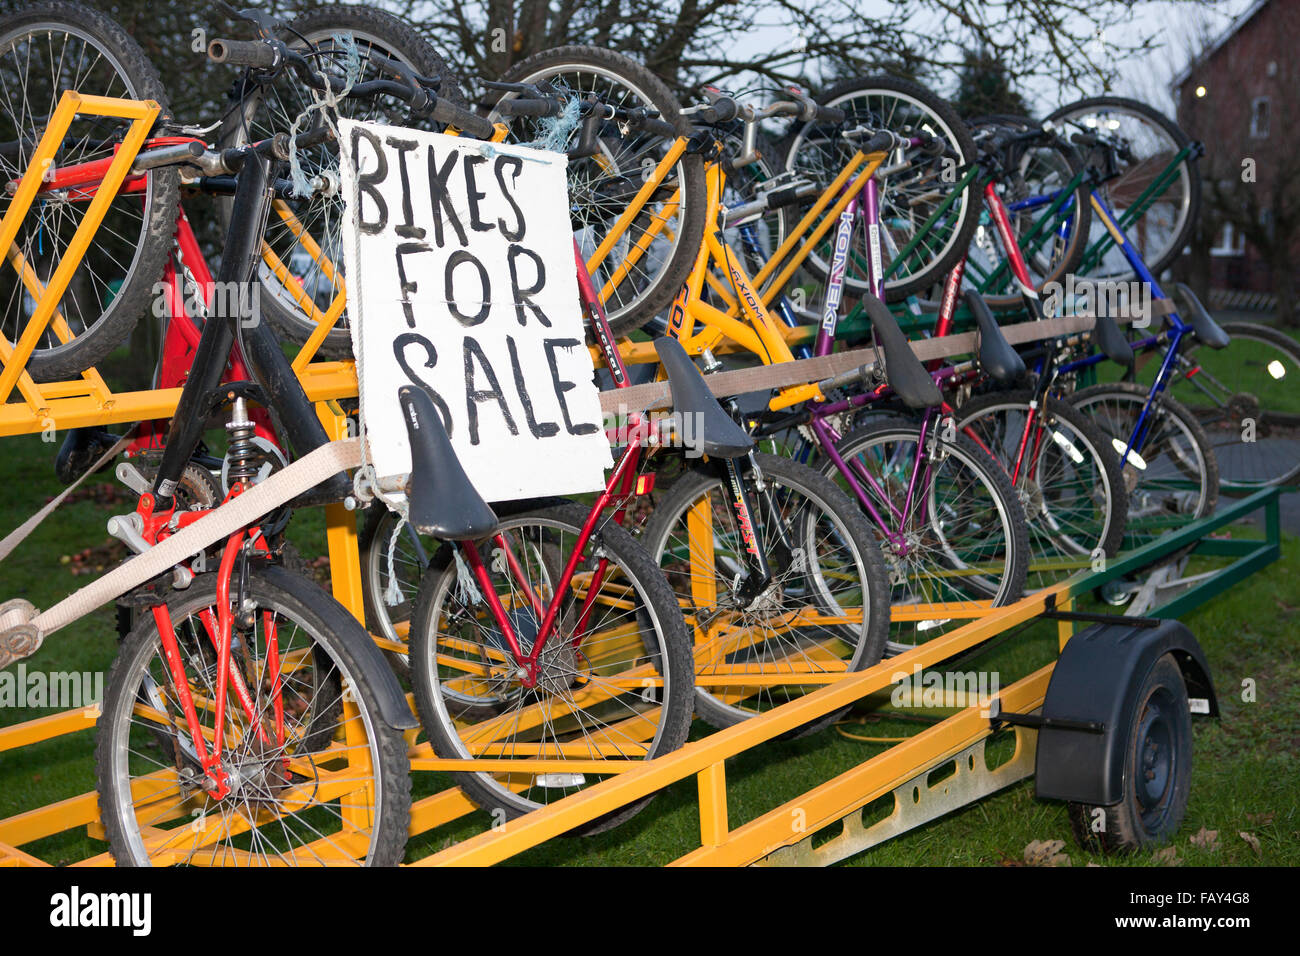 Bicycle Second Hand For Sale Deals